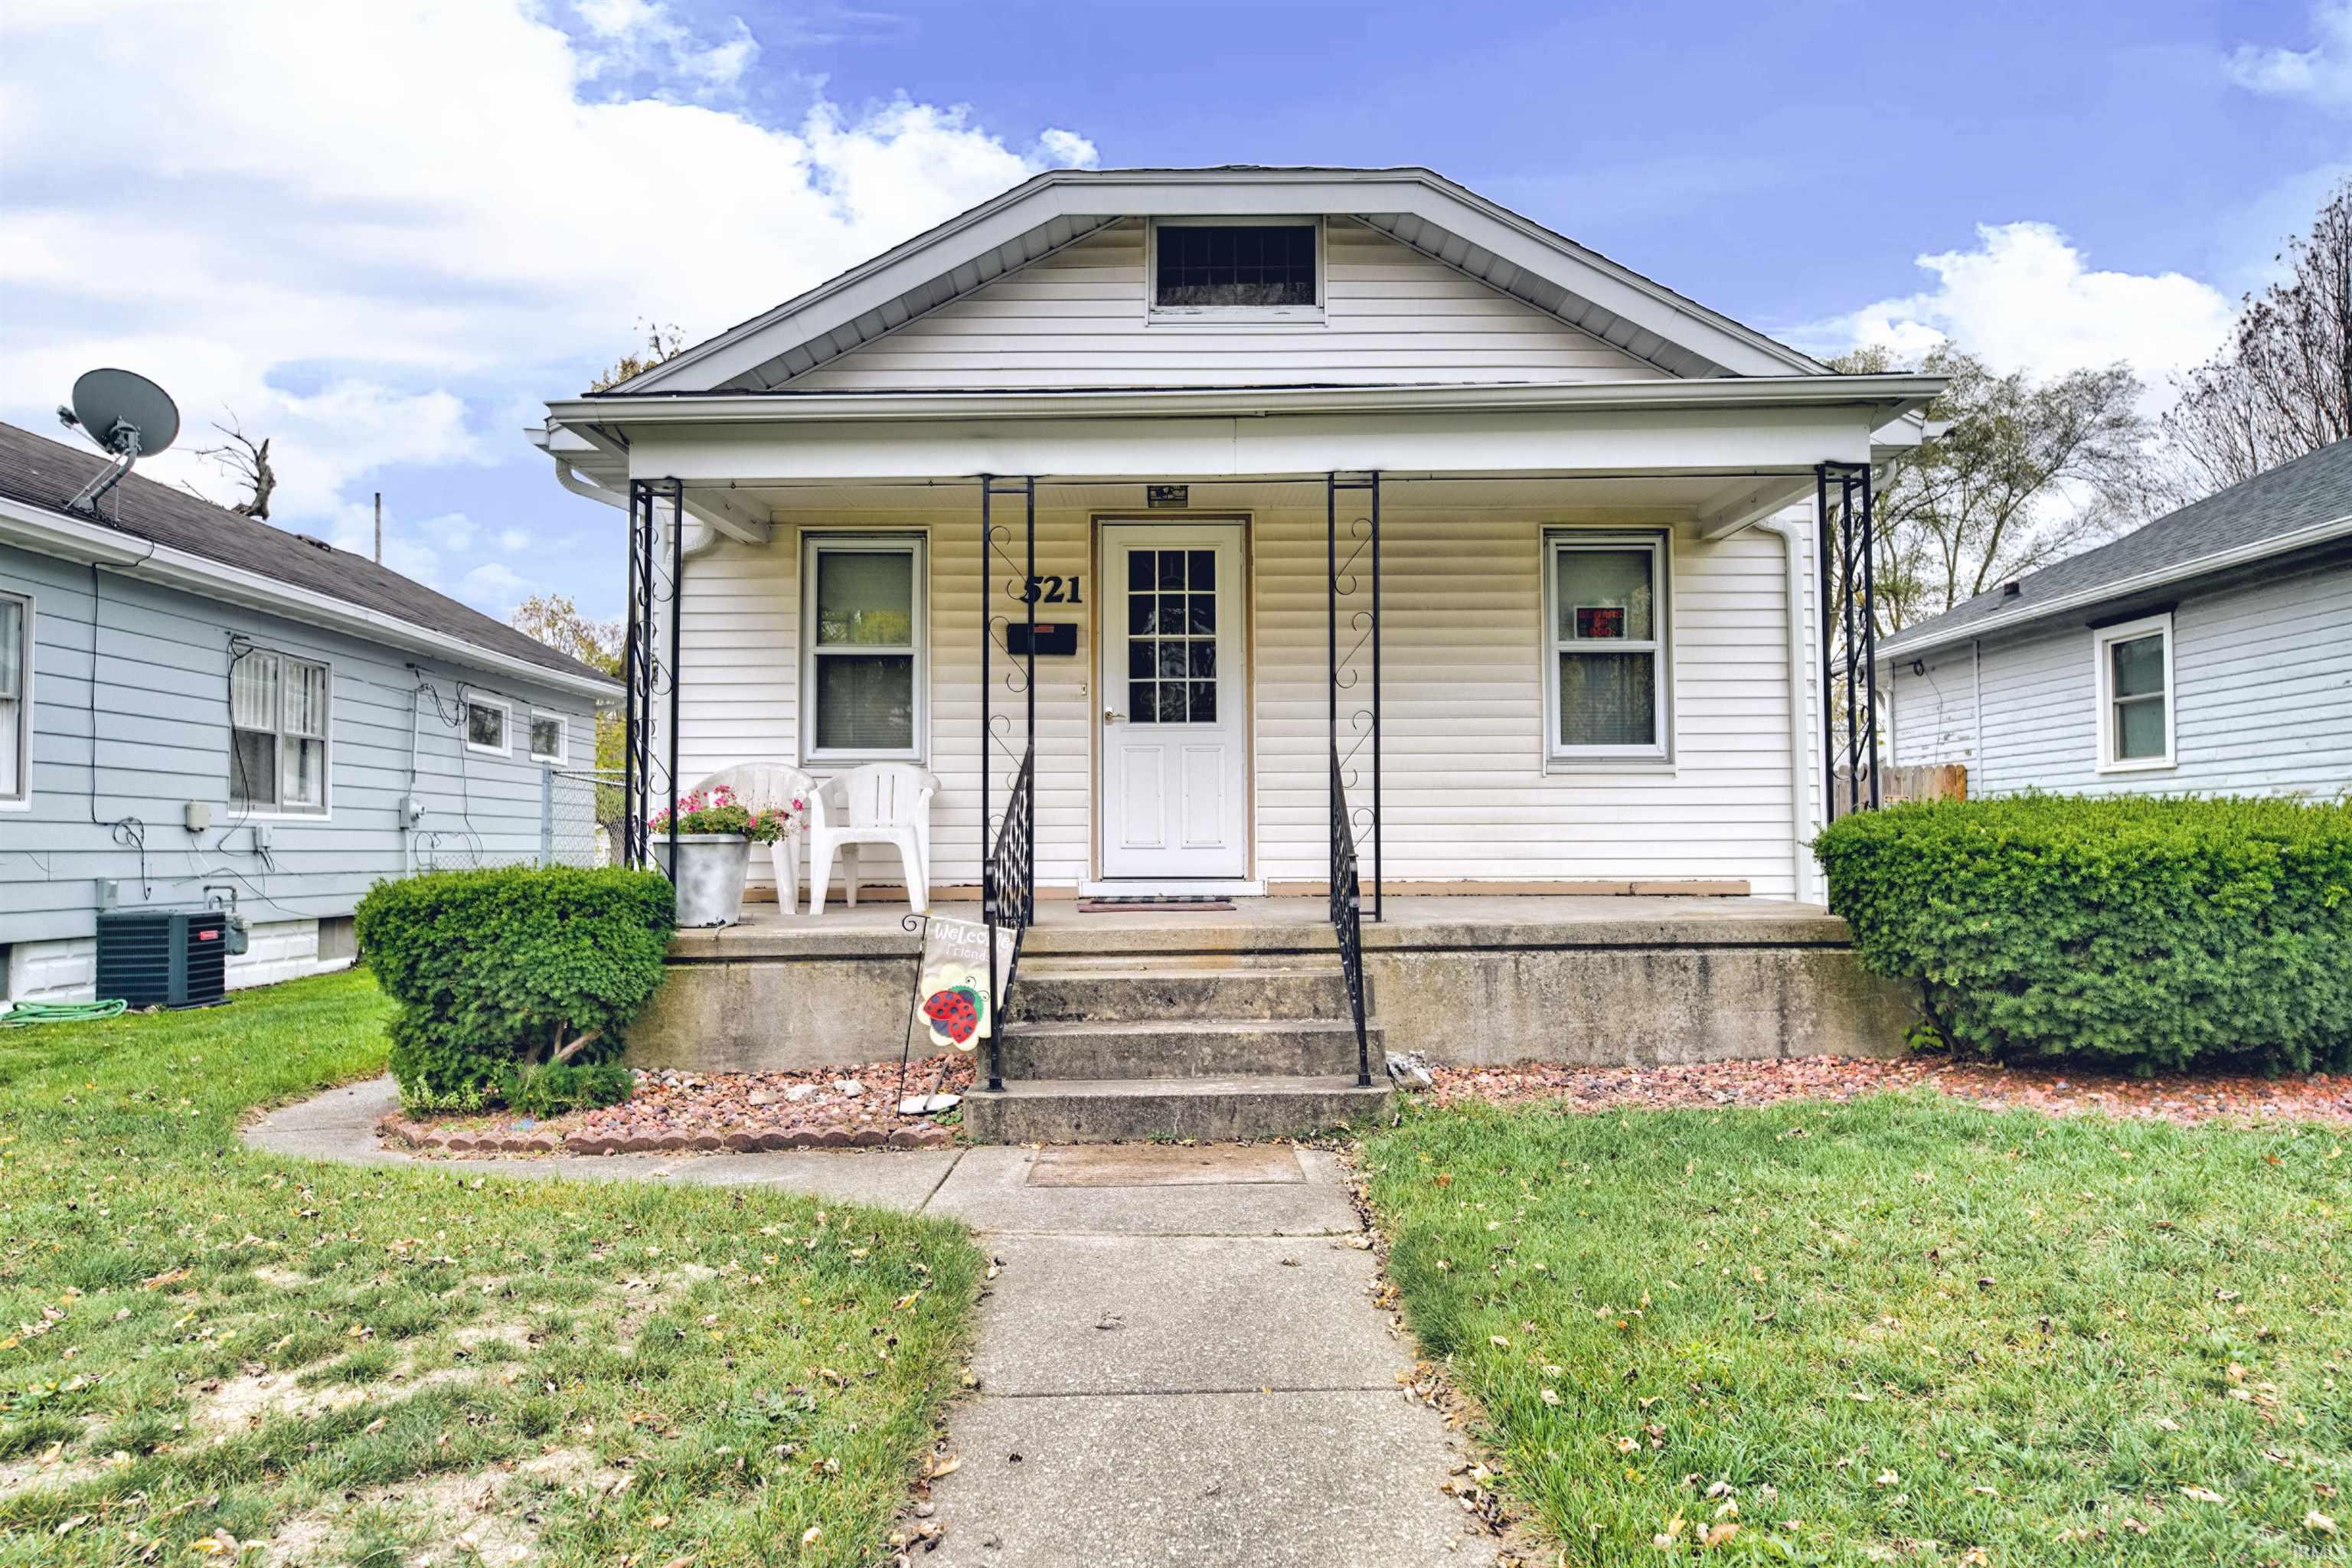 521 S 33RD Street, South Bend, IN 46615